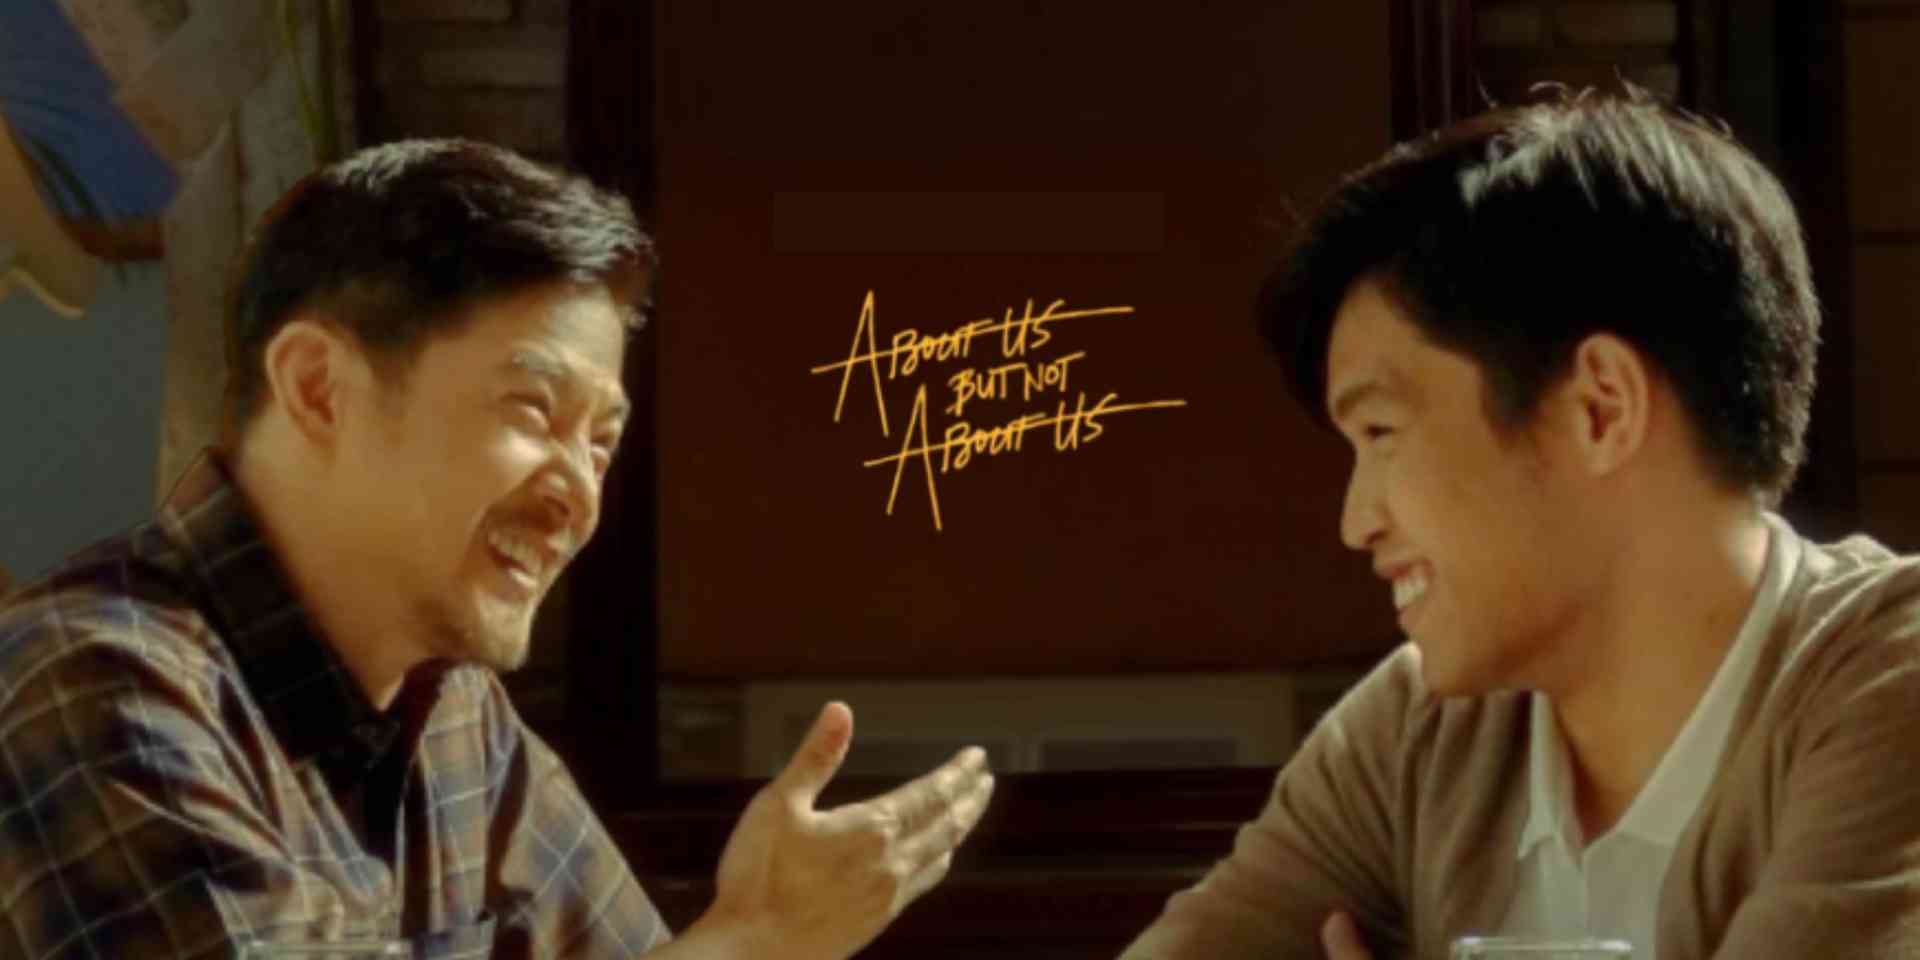 'About Us But Not About Us' dominates Summer MMFF awards; bags 10 awards including Best Picture